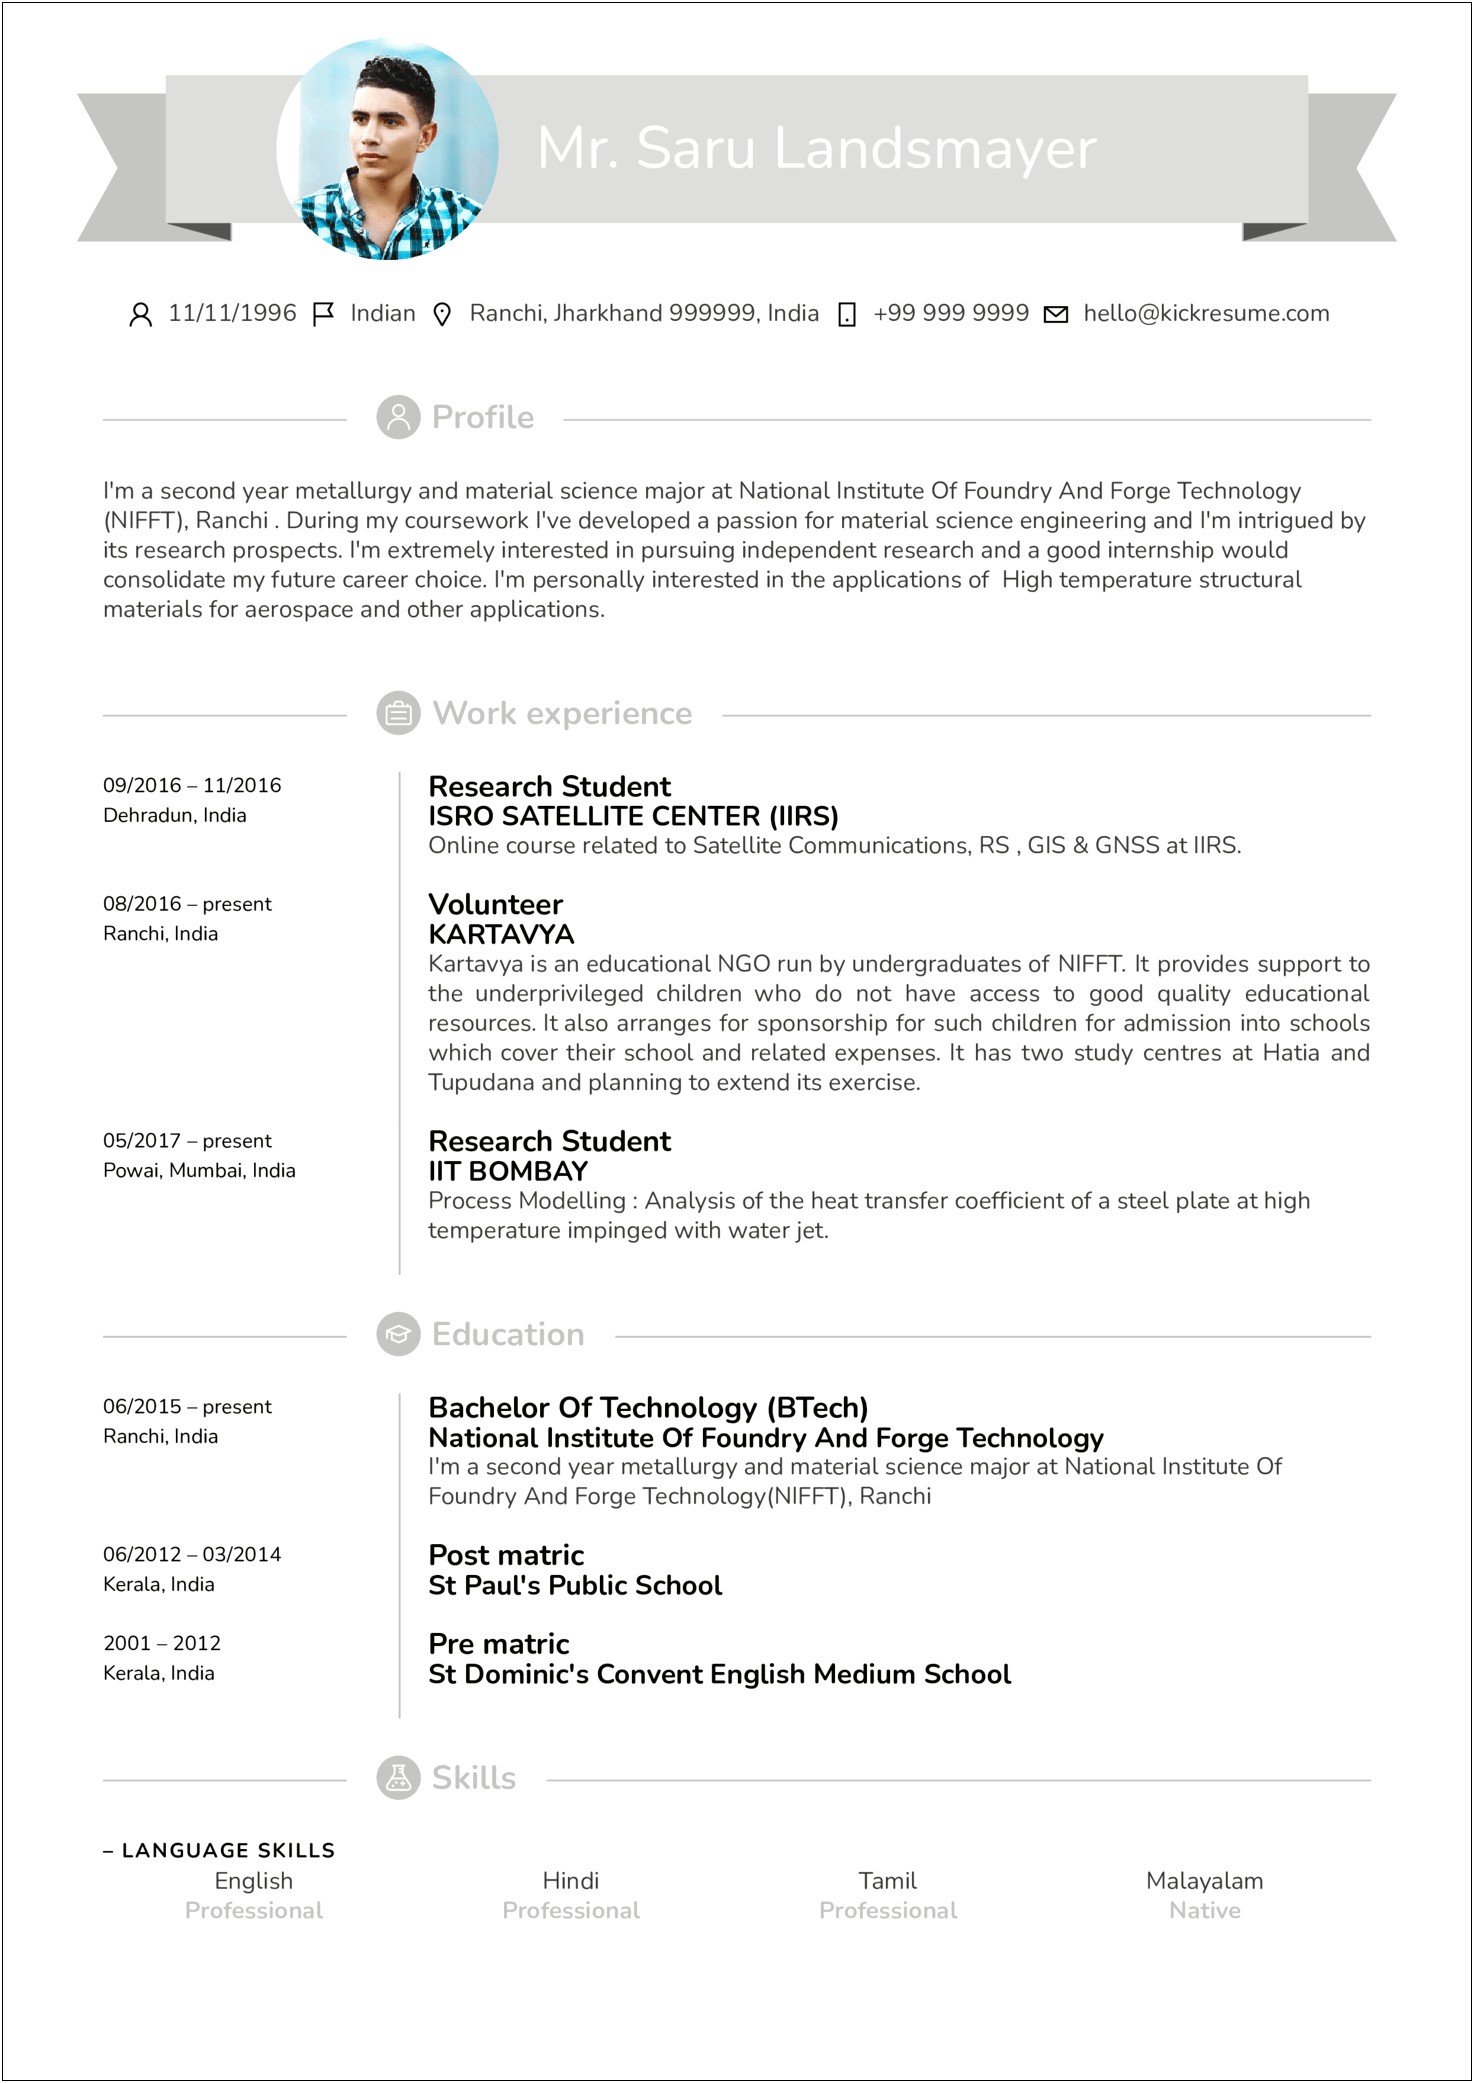 Research Skills To List On Resume